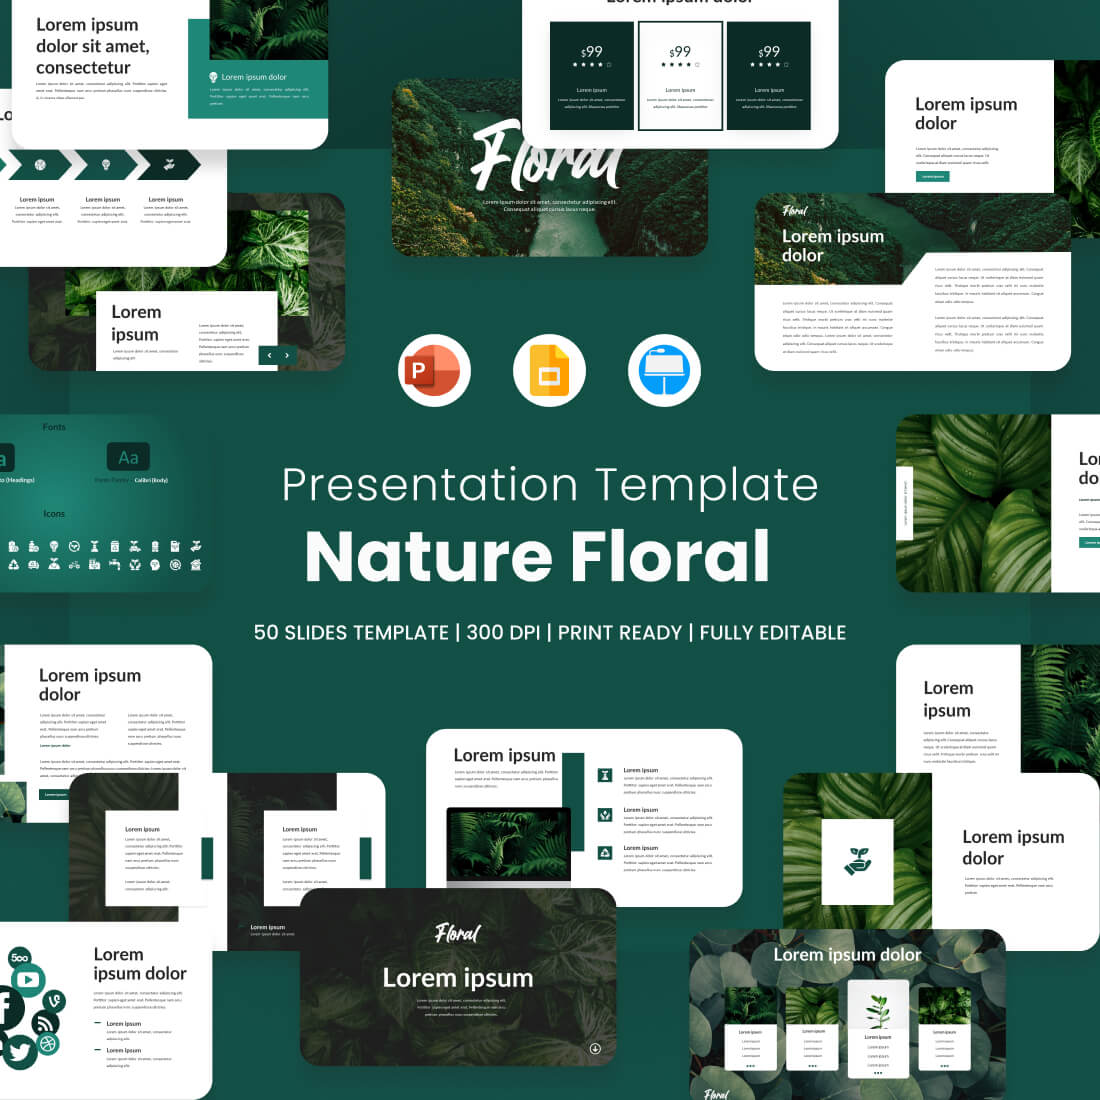 Nature Floral Presentation Template cover image.